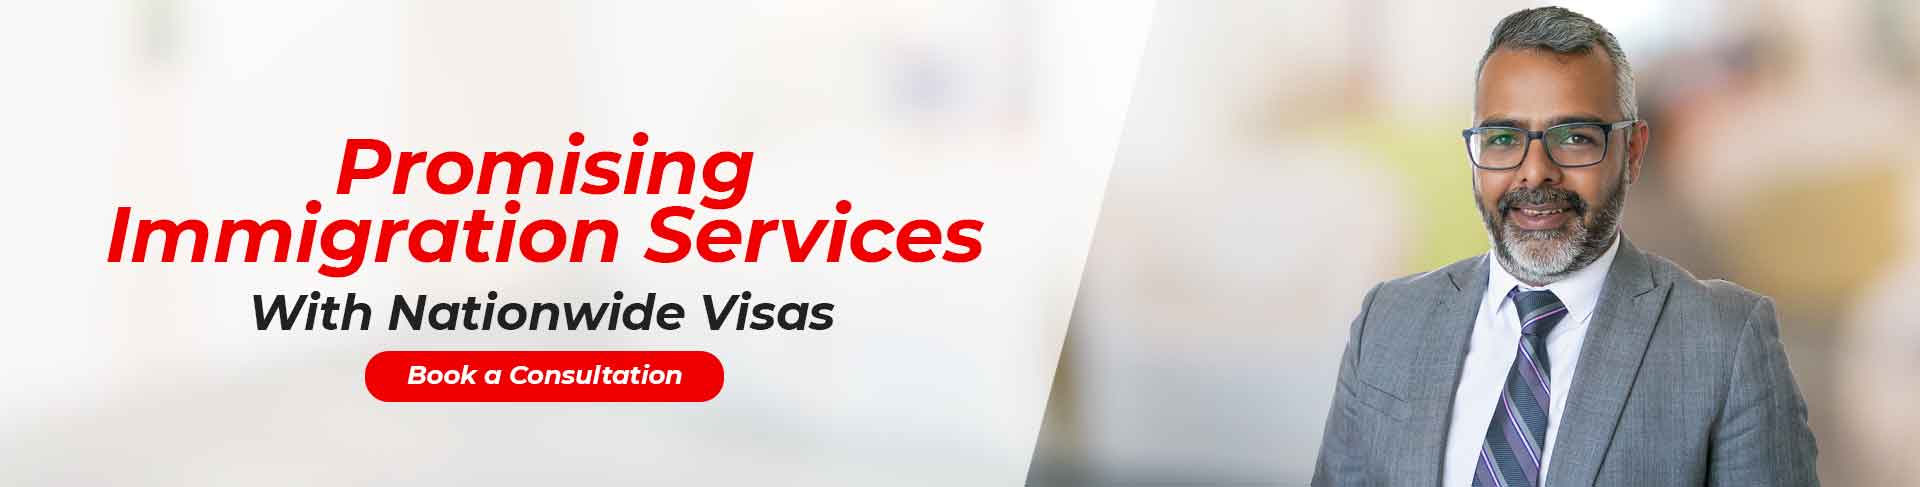 Promising Immigration Services with Nationwide Visas